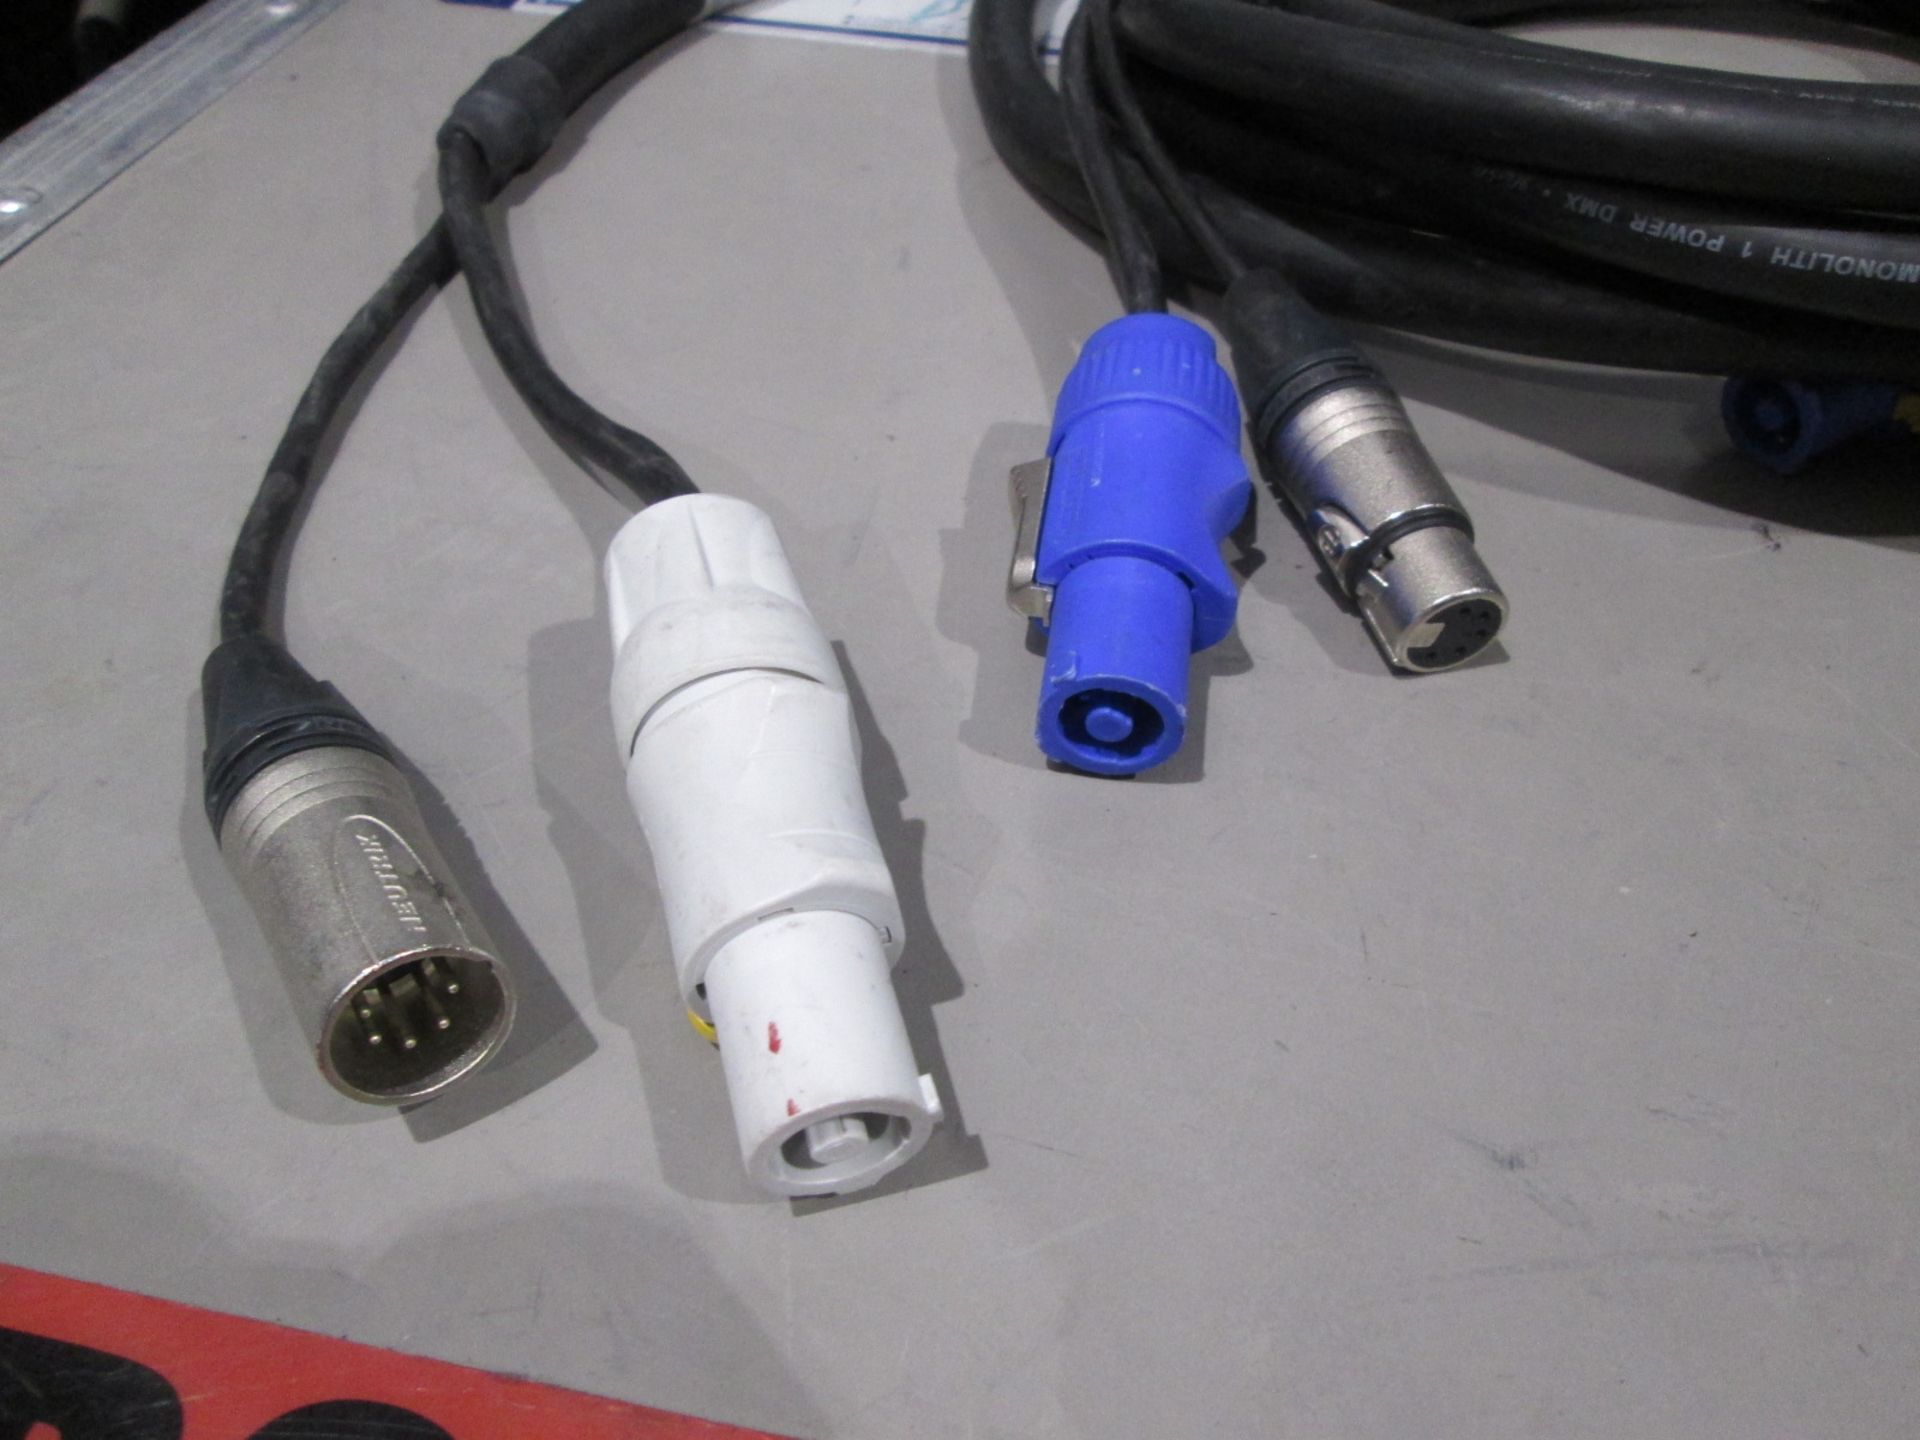 DMX 5 Pin and Powercon to Powercon 2.5 Metre Loom Cable (Qty 10) - Image 2 of 3